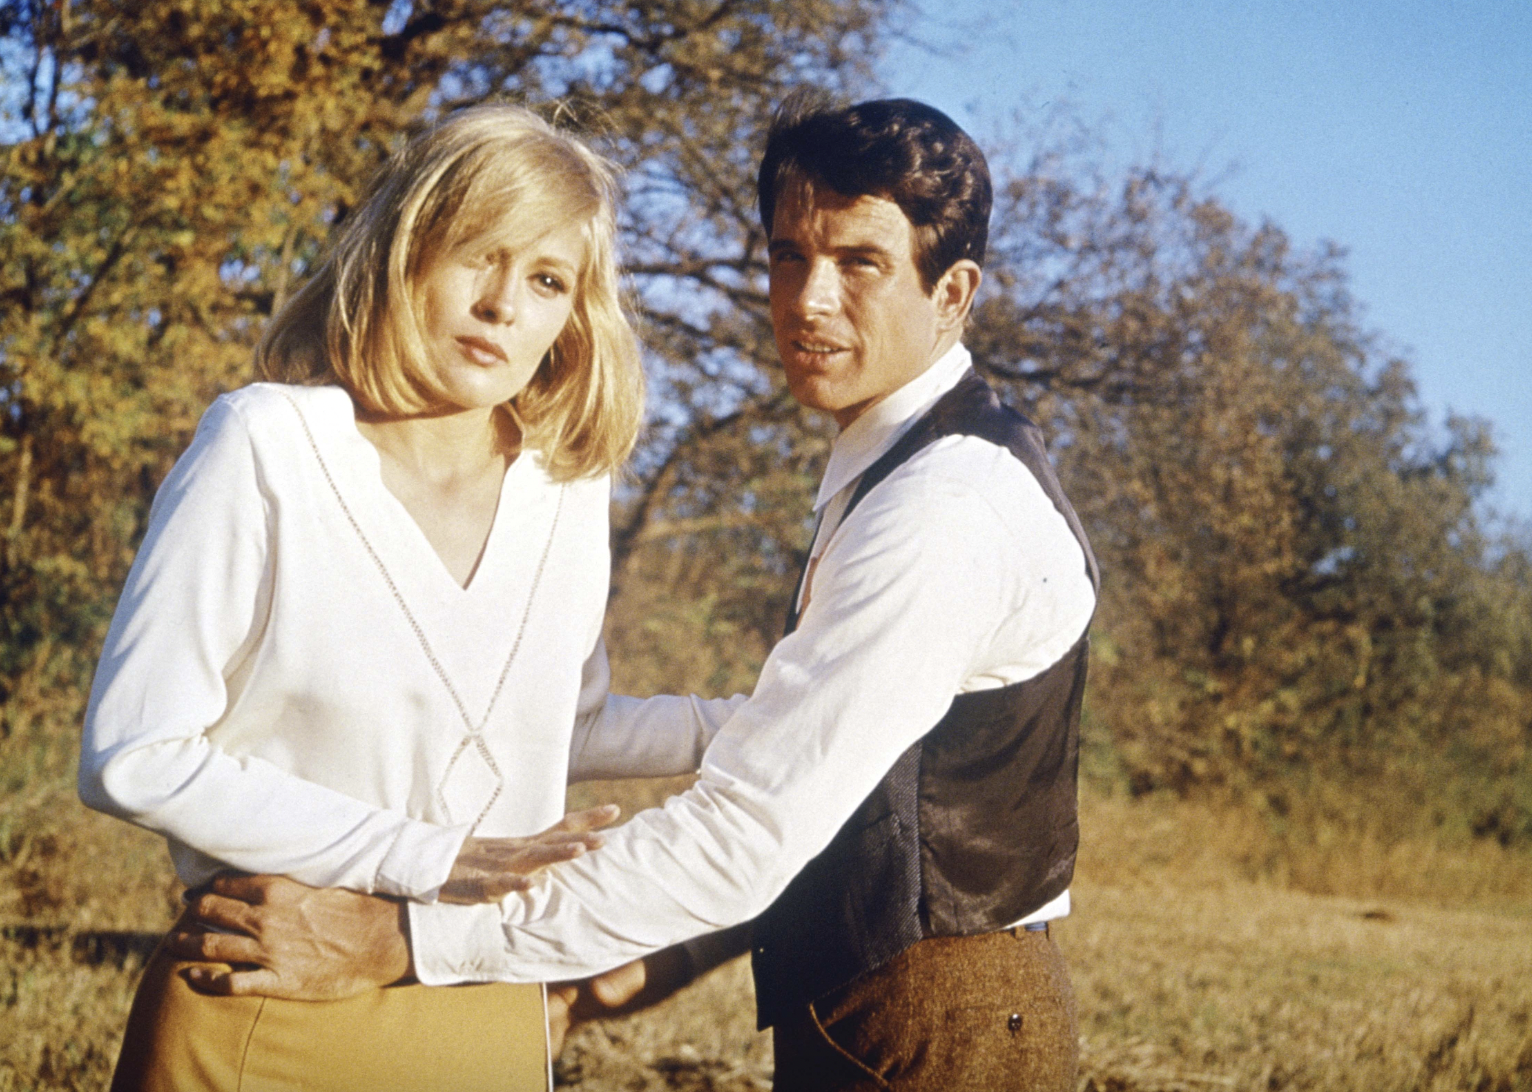 Warren Beatty and Faye Dunaway in "Bonnie and Clyde"